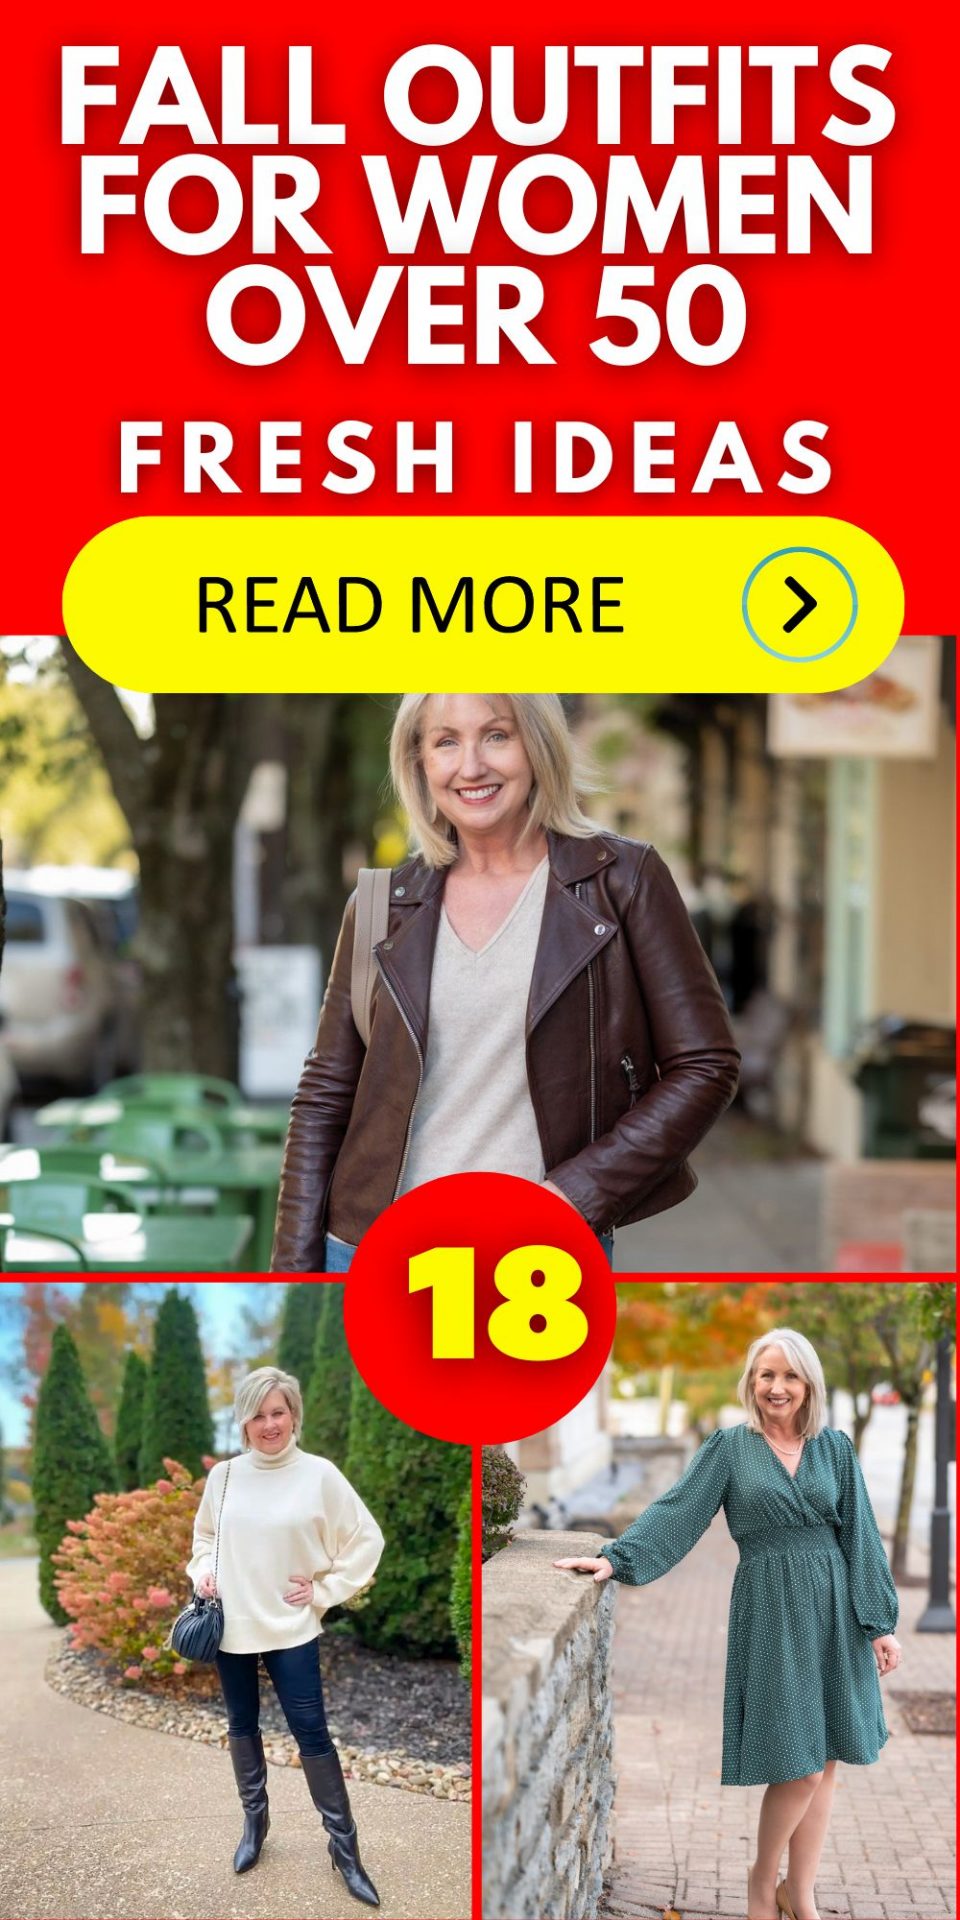 Fall Outfits for Women Over 50: Timeless Fashion 18 Ideas for 2023